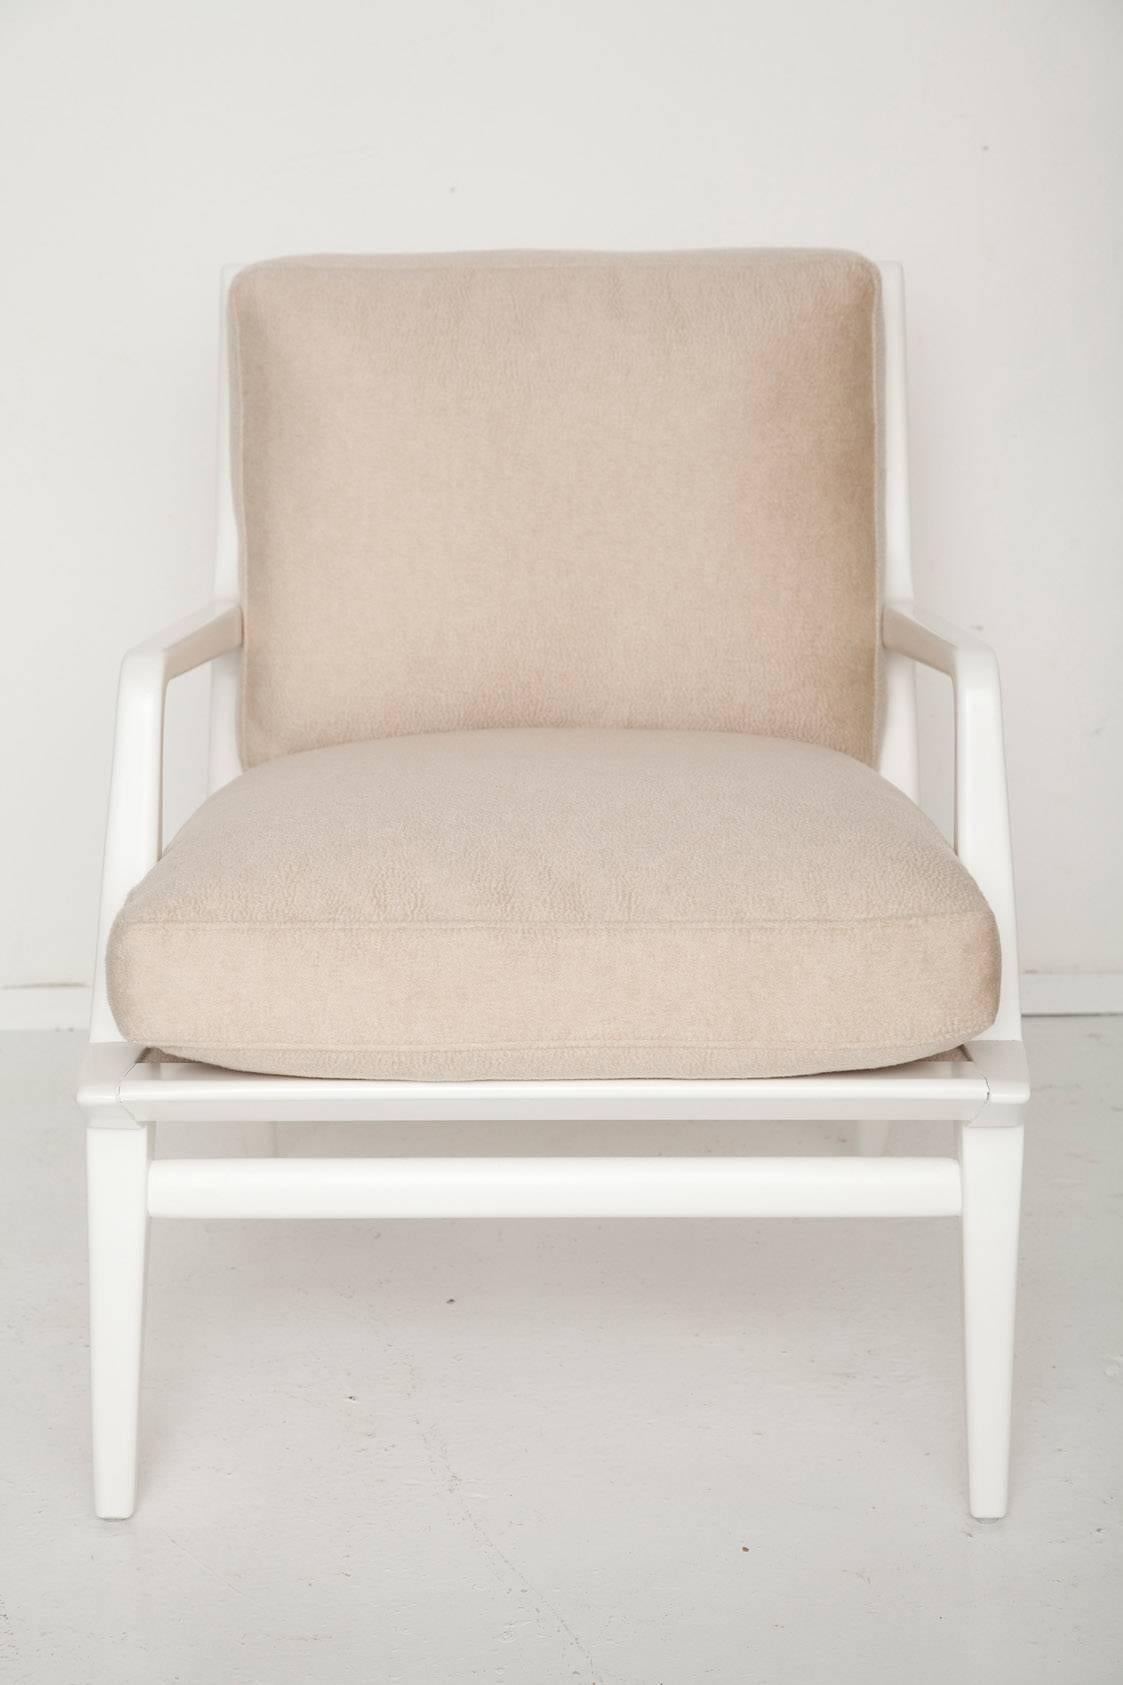 Italian Carlo Di Carli Cashmere Upholstered Lounge Chair for Singer & Sons, Circa 1955